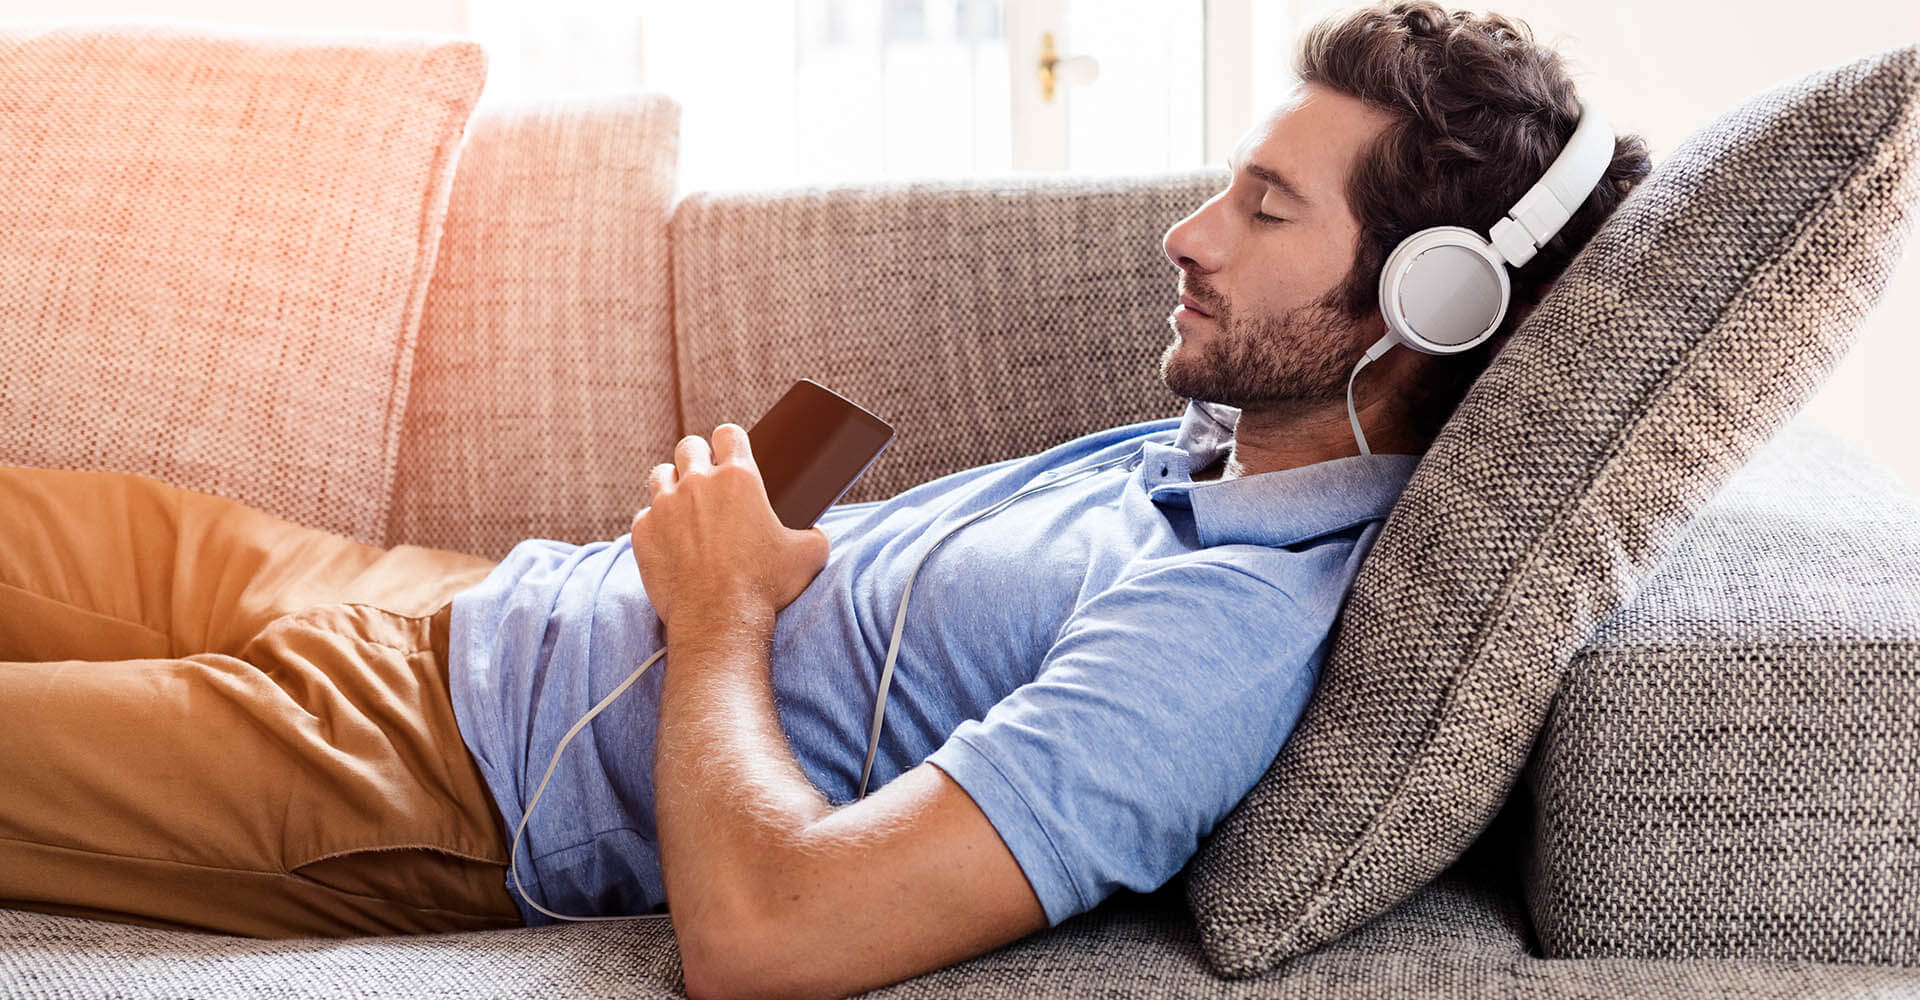 Man falling asleep on sofa while listening to music with headphones